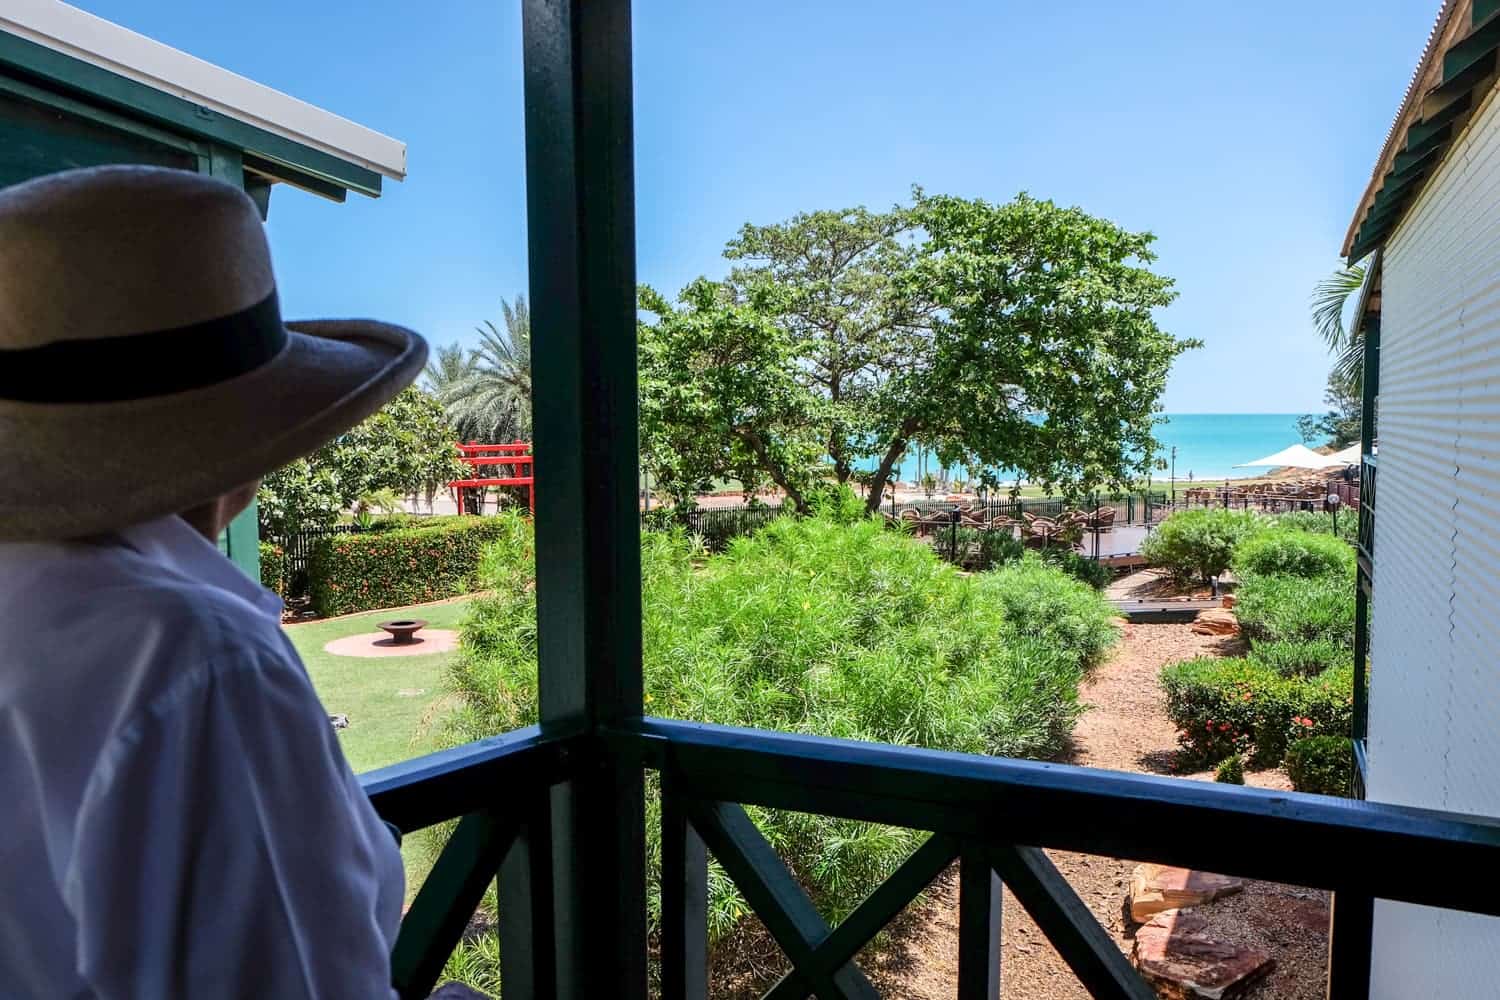 Rooms at Cable Beach Club in Broome, Western Australia